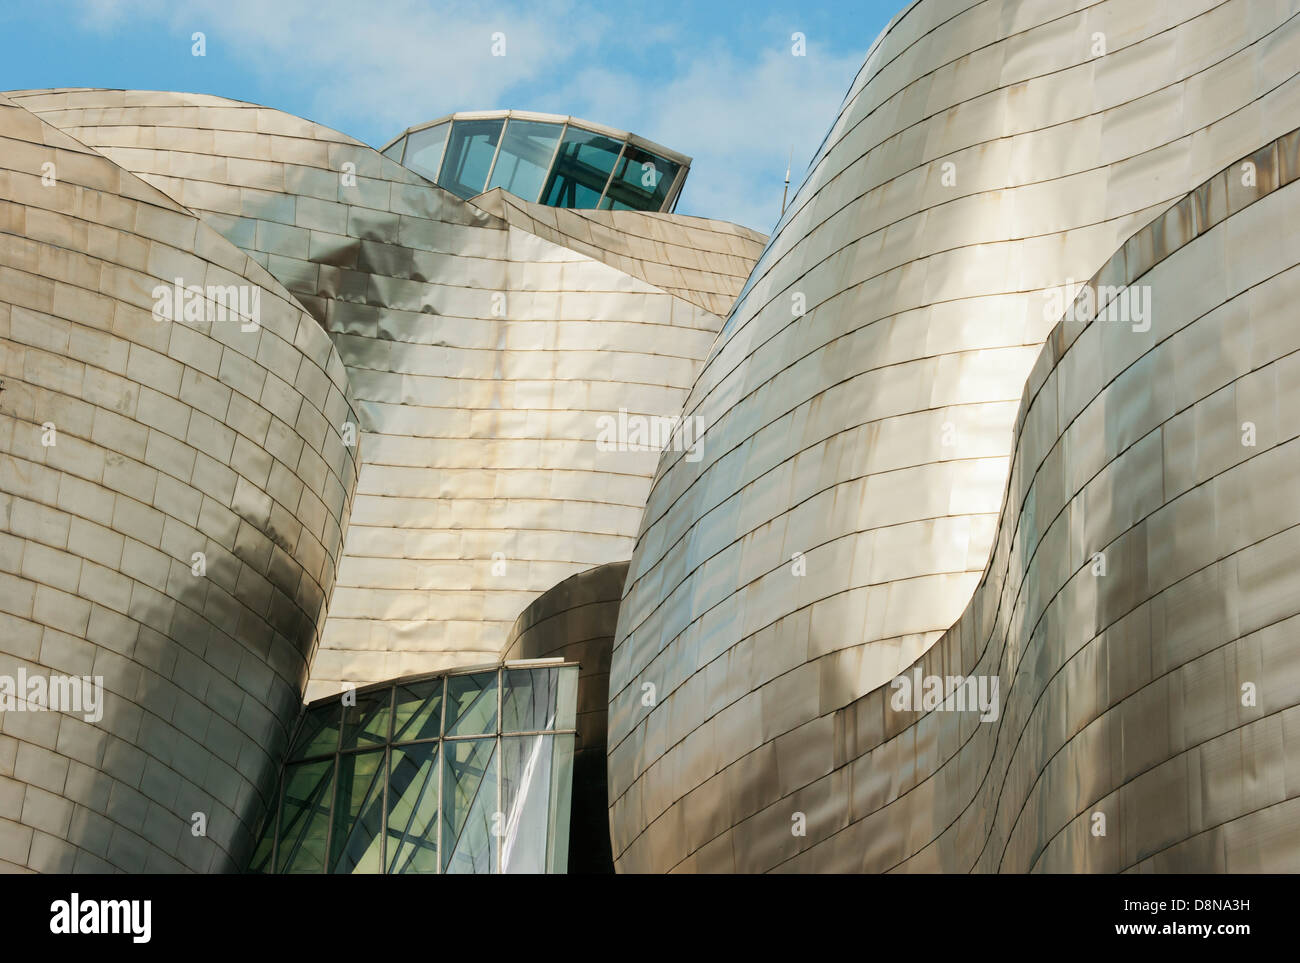 Museo Guggenheim, Bilbao, Spagna, Architetto : Frank Gehry Foto Stock